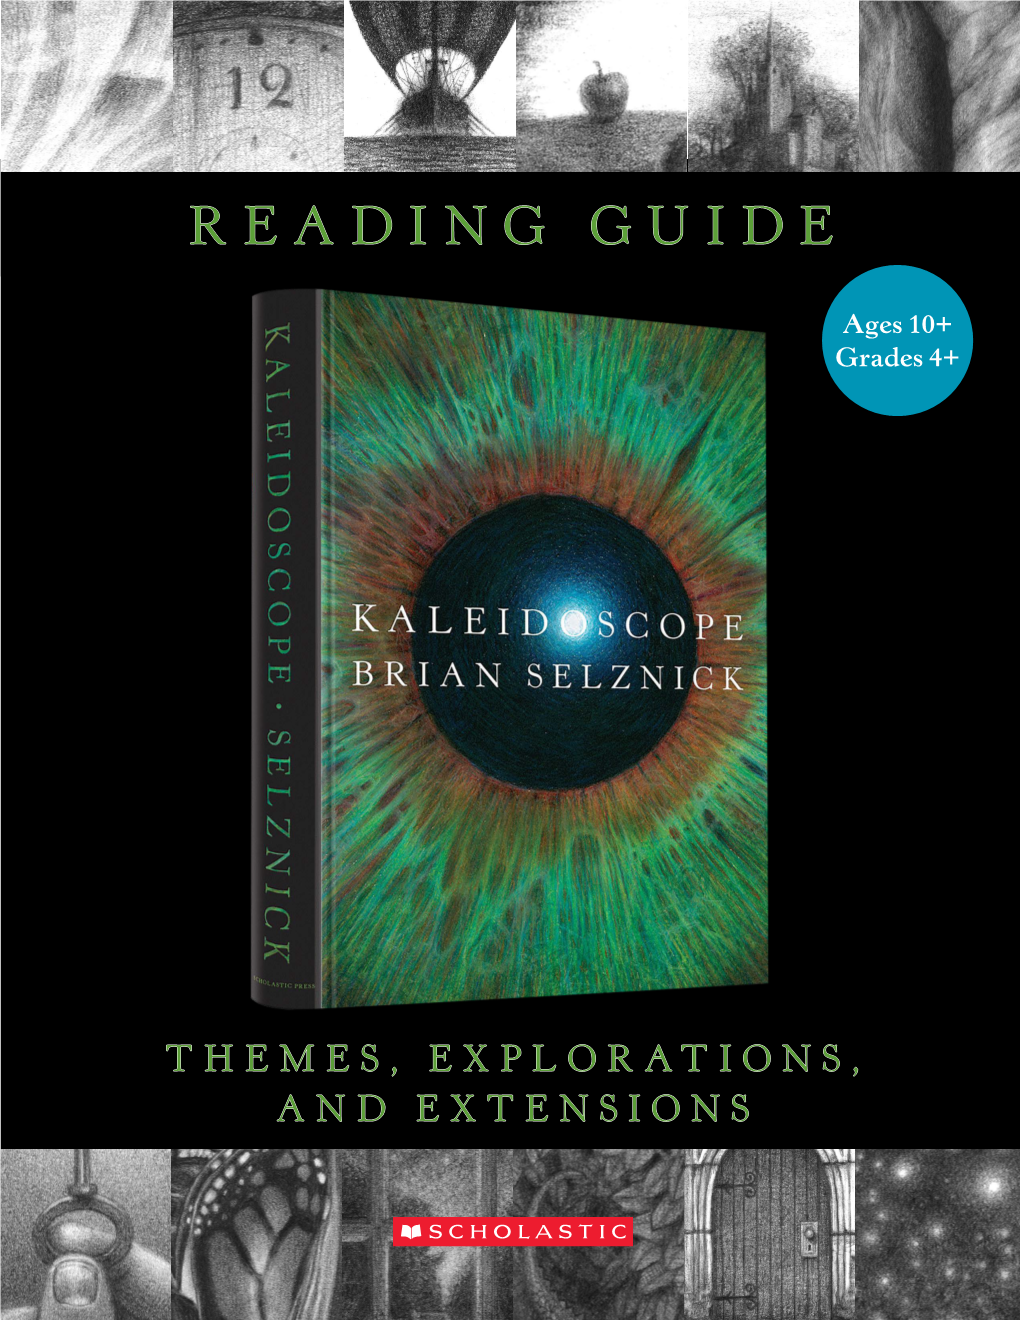 Kaleidoscope Discussion Guide Prepared by Connie Rockman, Youth Literature